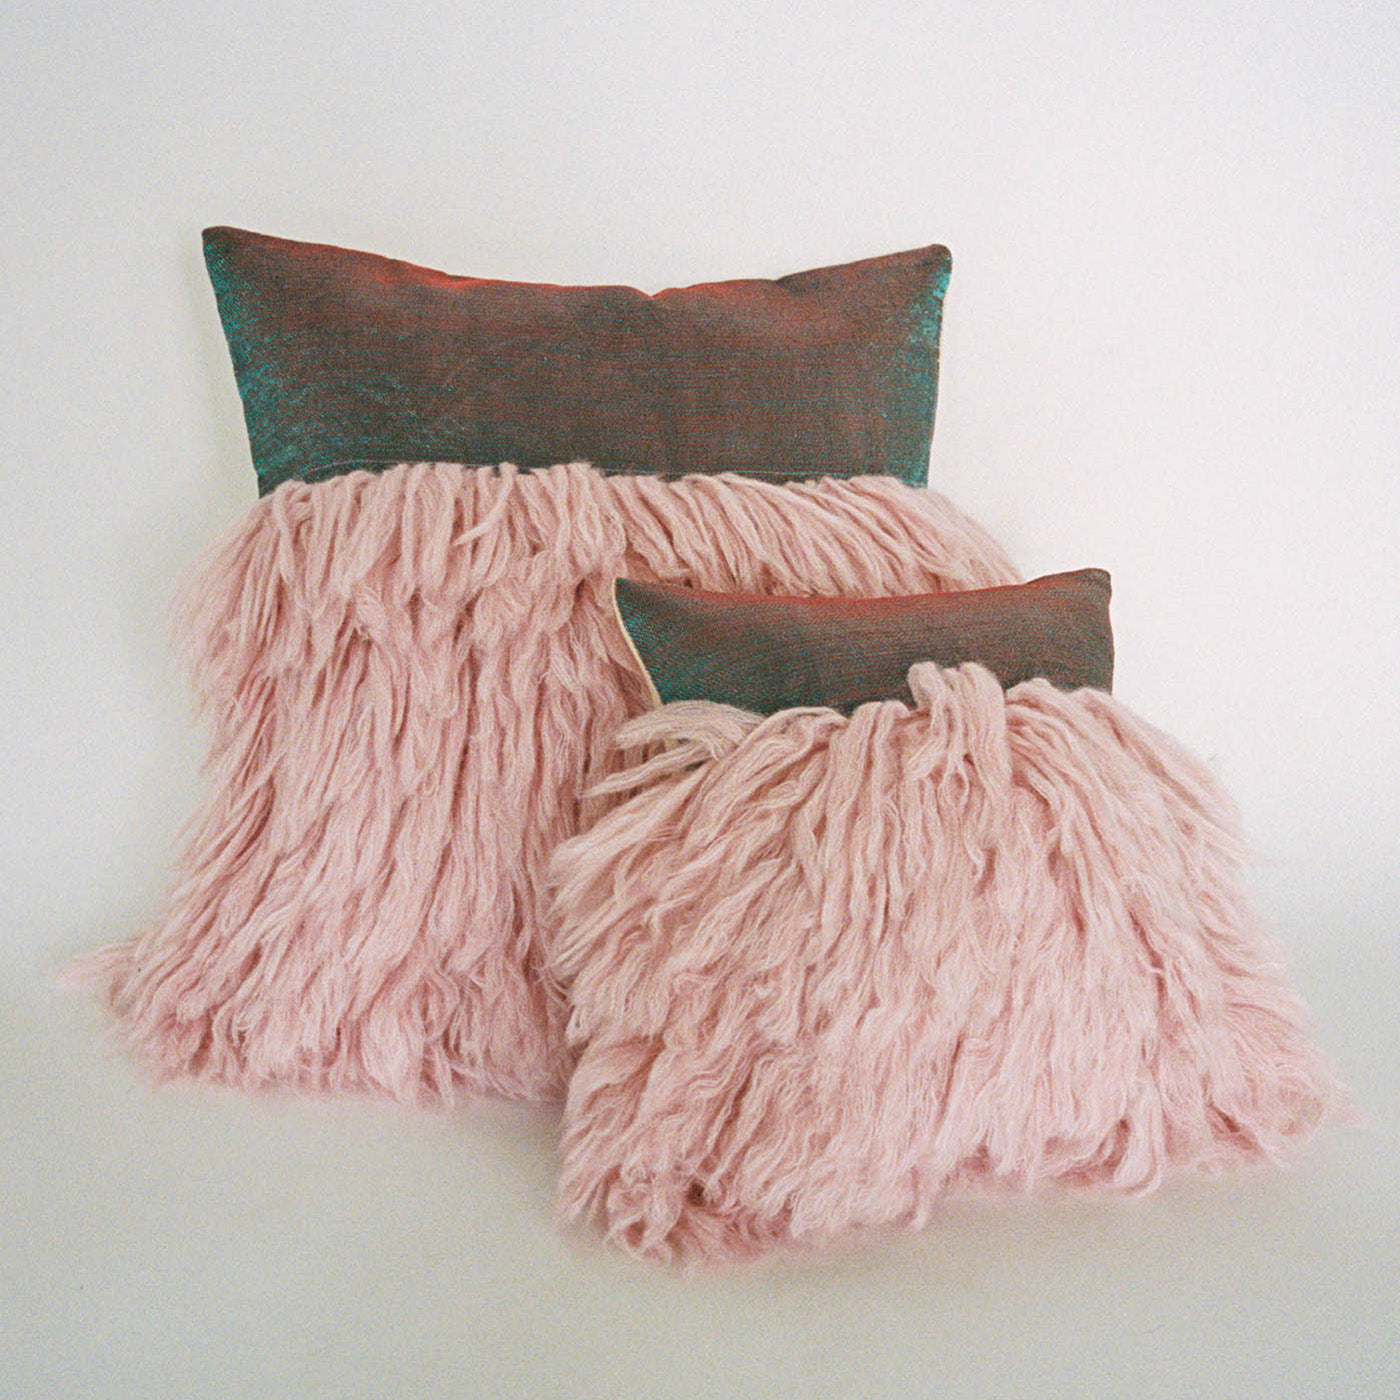 Hand Knit Plush Textured Throw Pillows in Pink